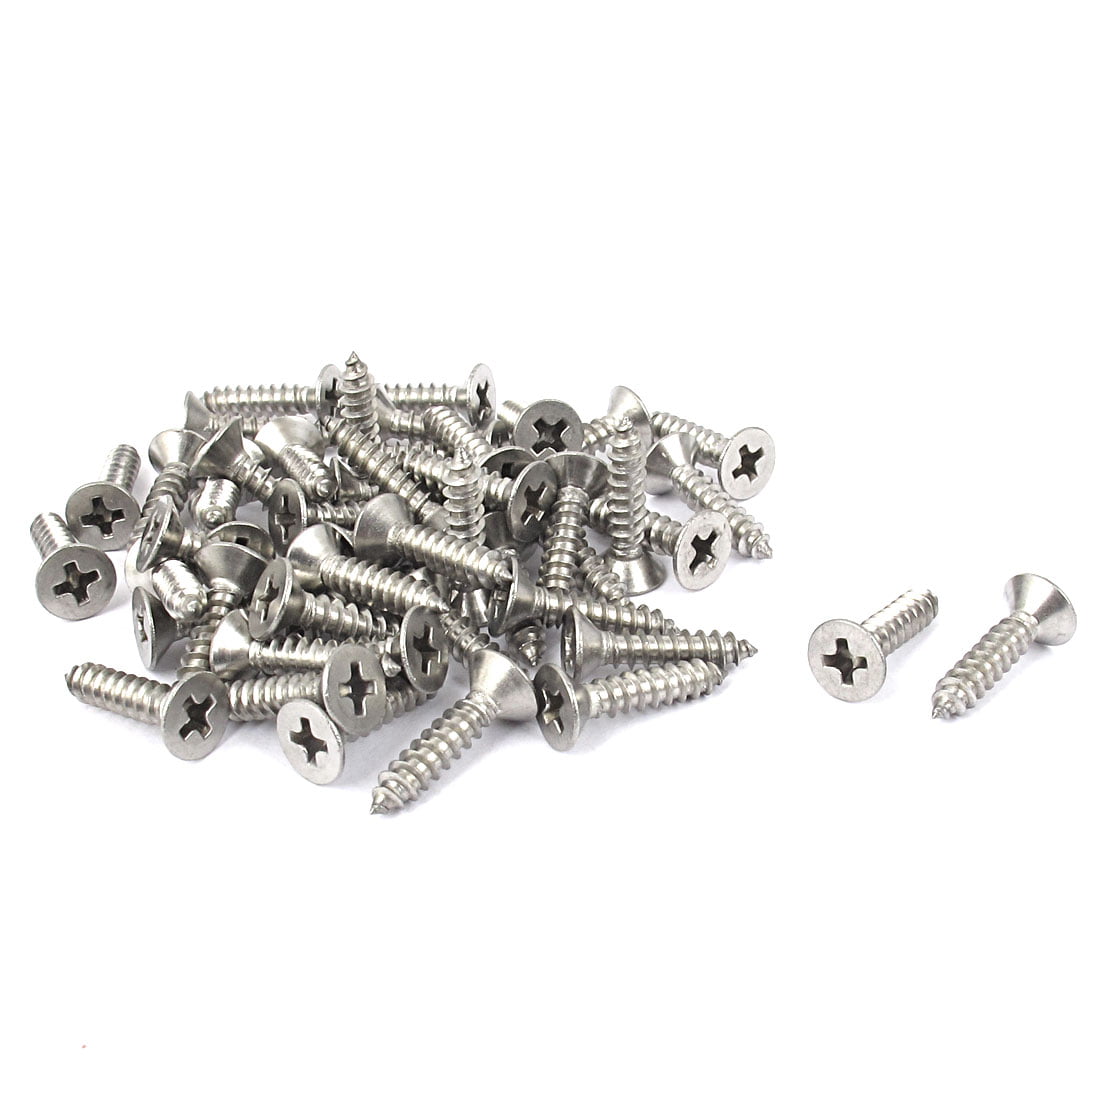 EVERMARKET M3 Cross Flat Head Tapping Wood Screws with Oxide and Wax 4 Size Screws Assortment Kit 200 Pcs